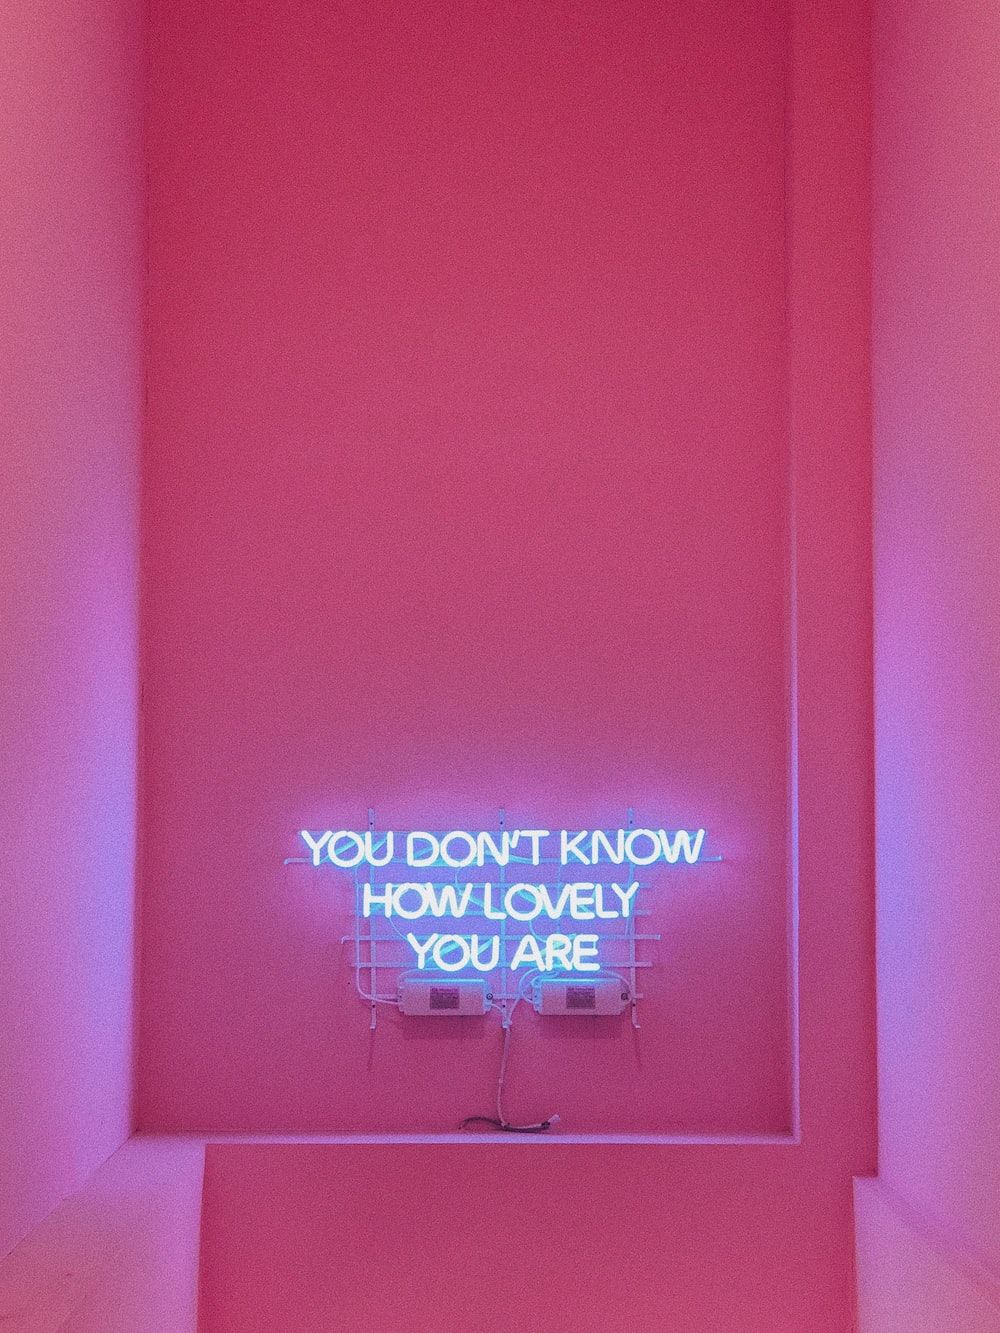 A neon sign that says you don't know what your doing - Hot pink, pink, neon pink, cute pink, profile picture, purple quotes